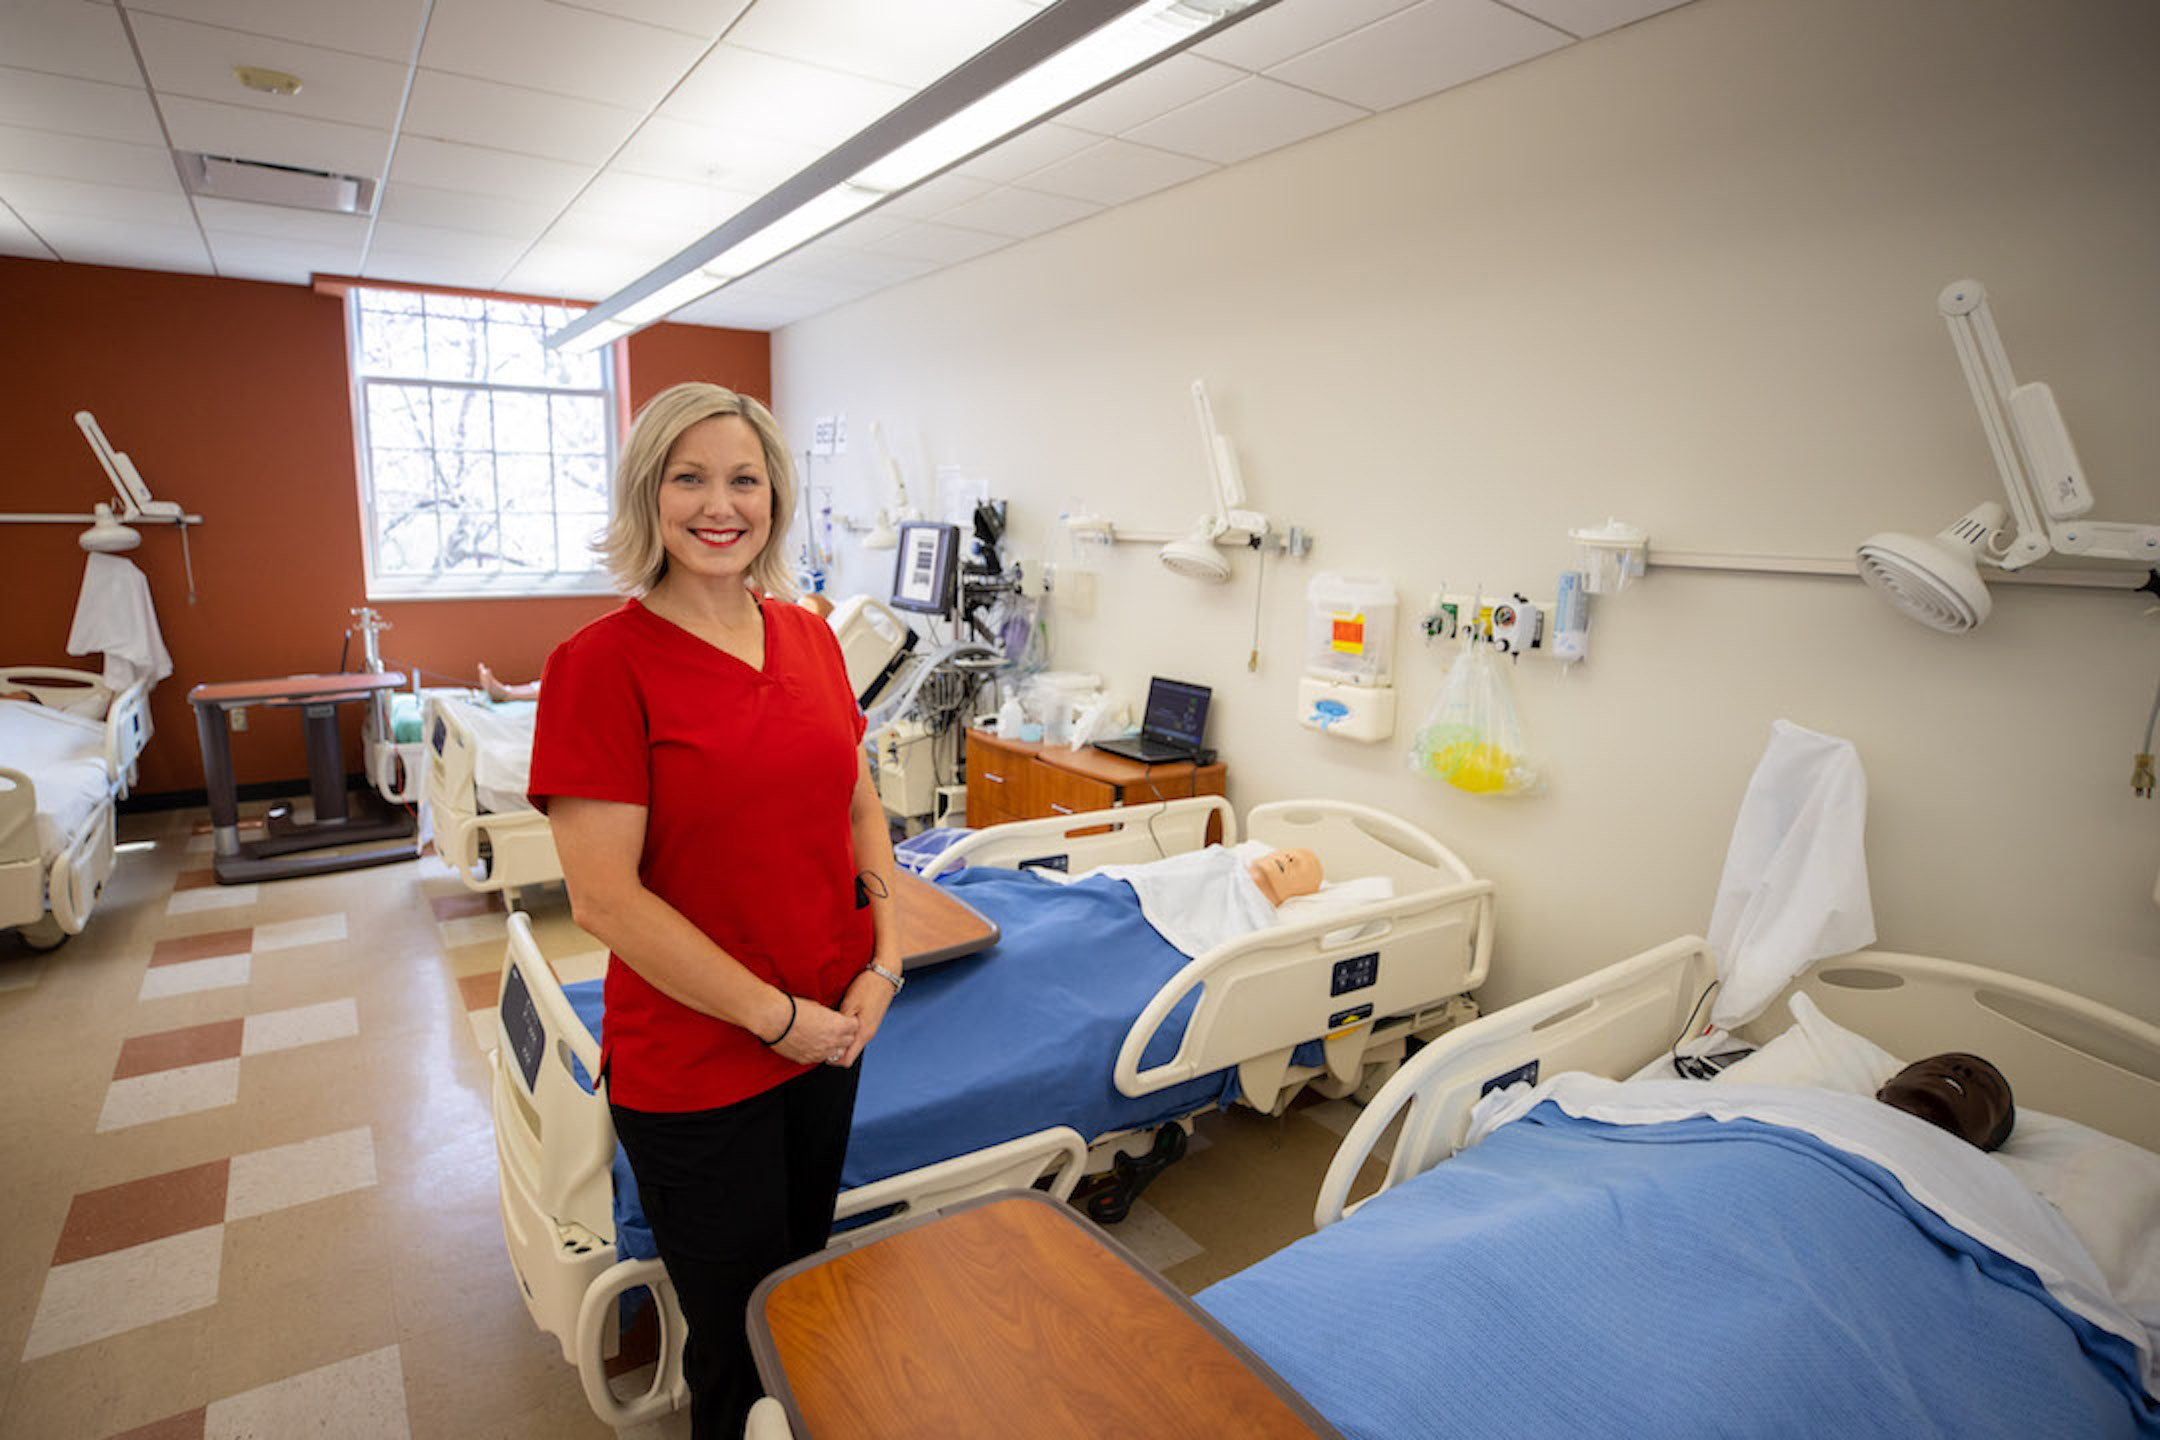 WASHINGTON, D.C. – The Society for Simulation in Healthcare announced On March 30 that Austin Peay State University adjunct Adrienne Wilk, MSN, RN, CHSE, CNE, CHSOS-A, has earned the international Certified Healthcare Simulation Operations Specialist-Advanced™ (CHSOS-A™) credential.  She joins the ranks of 25 people from four countries who have achieved this distinction.  Wilk submitted a portfolio that demonstrated her advanced performance as an operations specialist in the healthcare simulation field. This was peer-reviewed against established standards of performance.   The comprehensive CHSOS-A™ credential covers design, delivery, technological and operational simulation principles, as well as leadership and demonstrated impact on the field to meet the needs of healthcare learners at all levels.  Wilk is an adjunct faculty at Austin Peay State University’s School of Nursing. She assists Nursing Simulation Coordinator Cindy Meyer in managing the simulation curriculum in the school’s Nursing Simulation Center.  More about the Society for Simulation in Healthcare  The largest healthcare simulation organization in the world, the Society for Simulation in Healthcare (SSH) is a 501(c)3 organization with more than 4,900 members from more than 60 countries. SSH’s purpose is to serve a global community of practice enhancing the quality of healthcare. SSH was established in 2004.  The mission of SSH is to serve its members by fostering education, professional development, and the advancement of research and innovation; promote the profession of healthcare simulation through standards and ethics; and champion healthcare simulation through advocating sharing, facilitating, and collaborating.